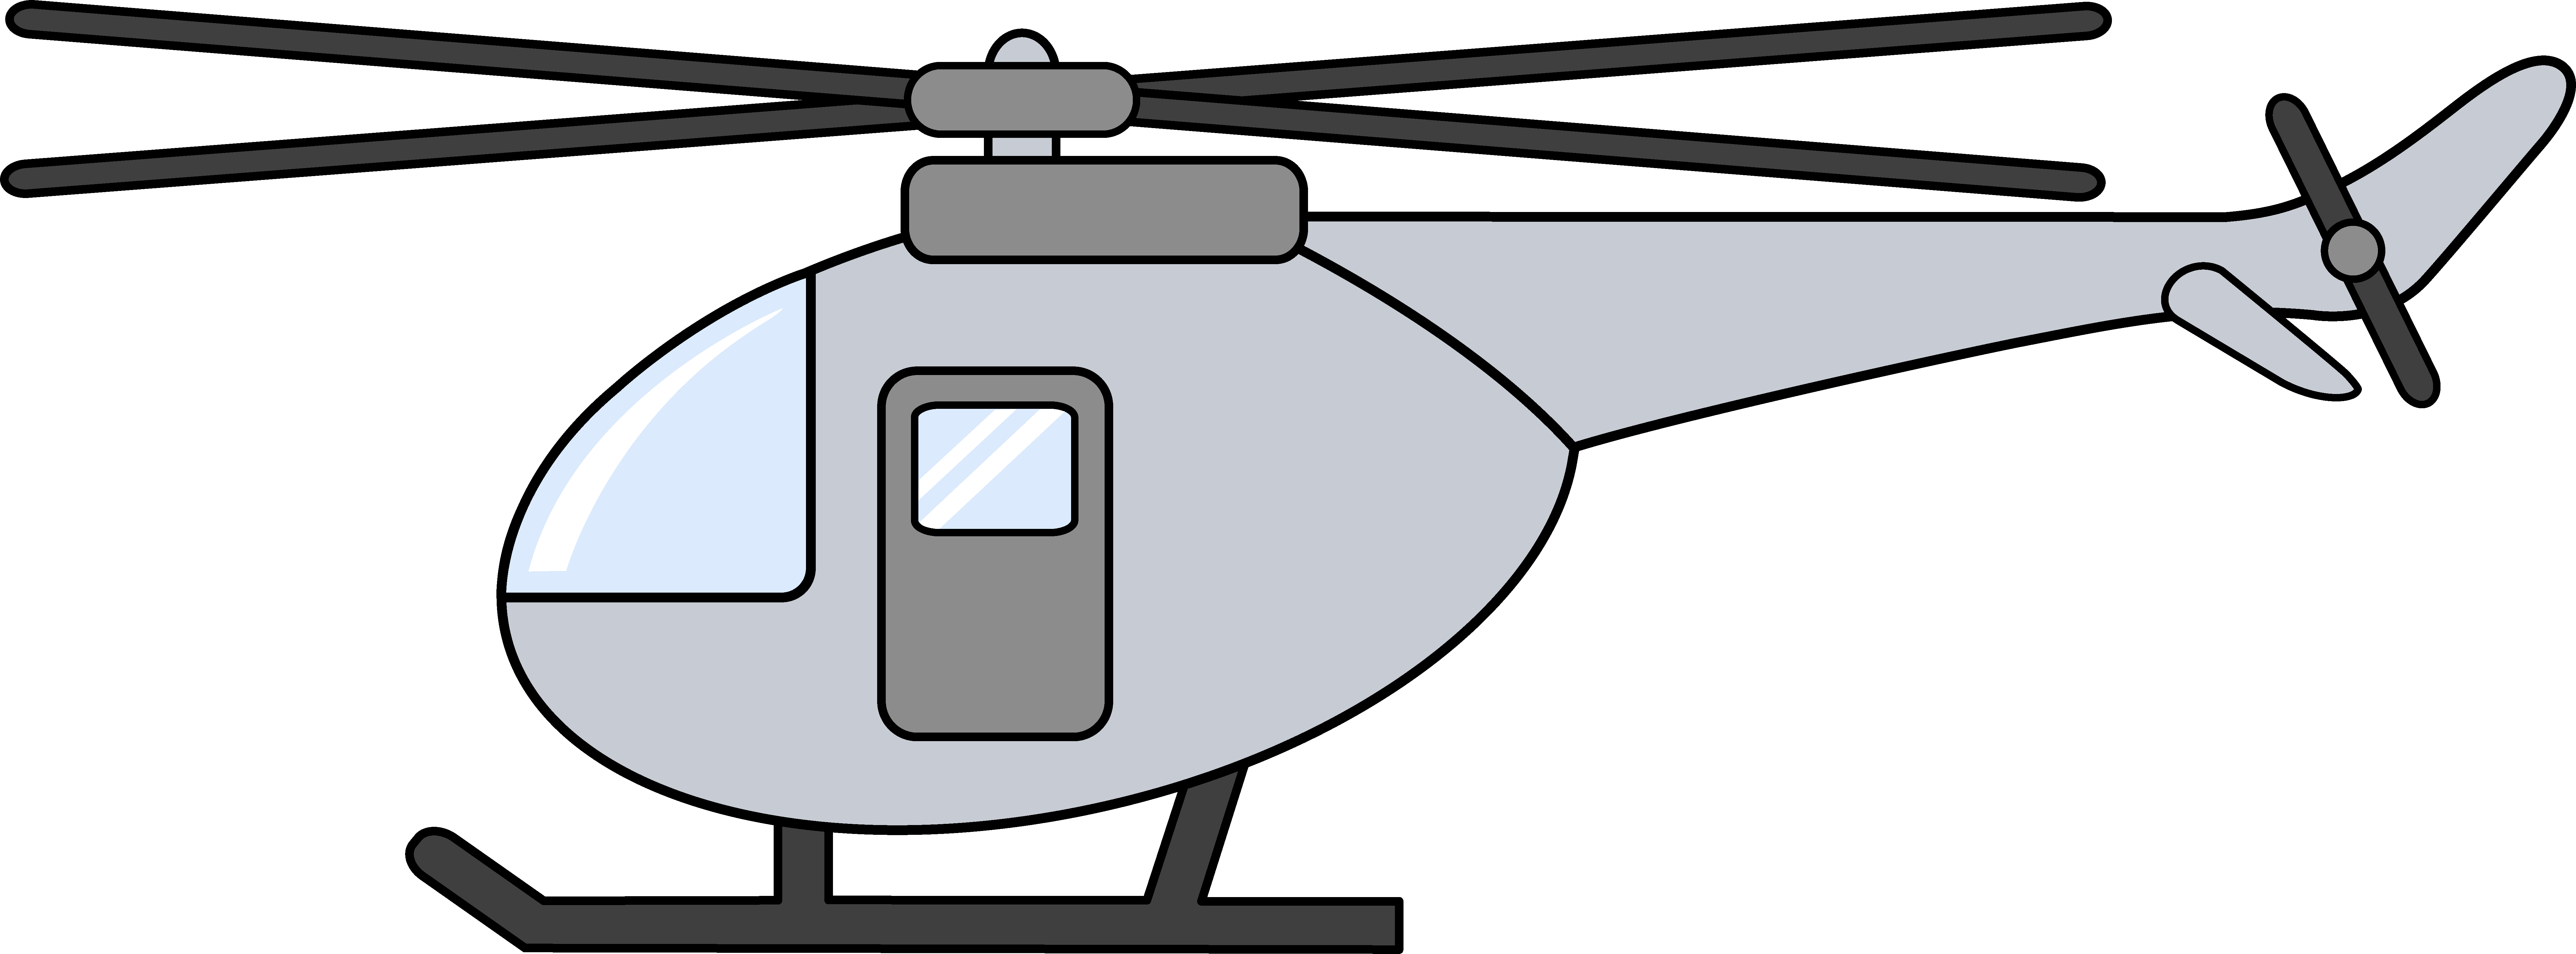 clipart of helicopter - photo #29